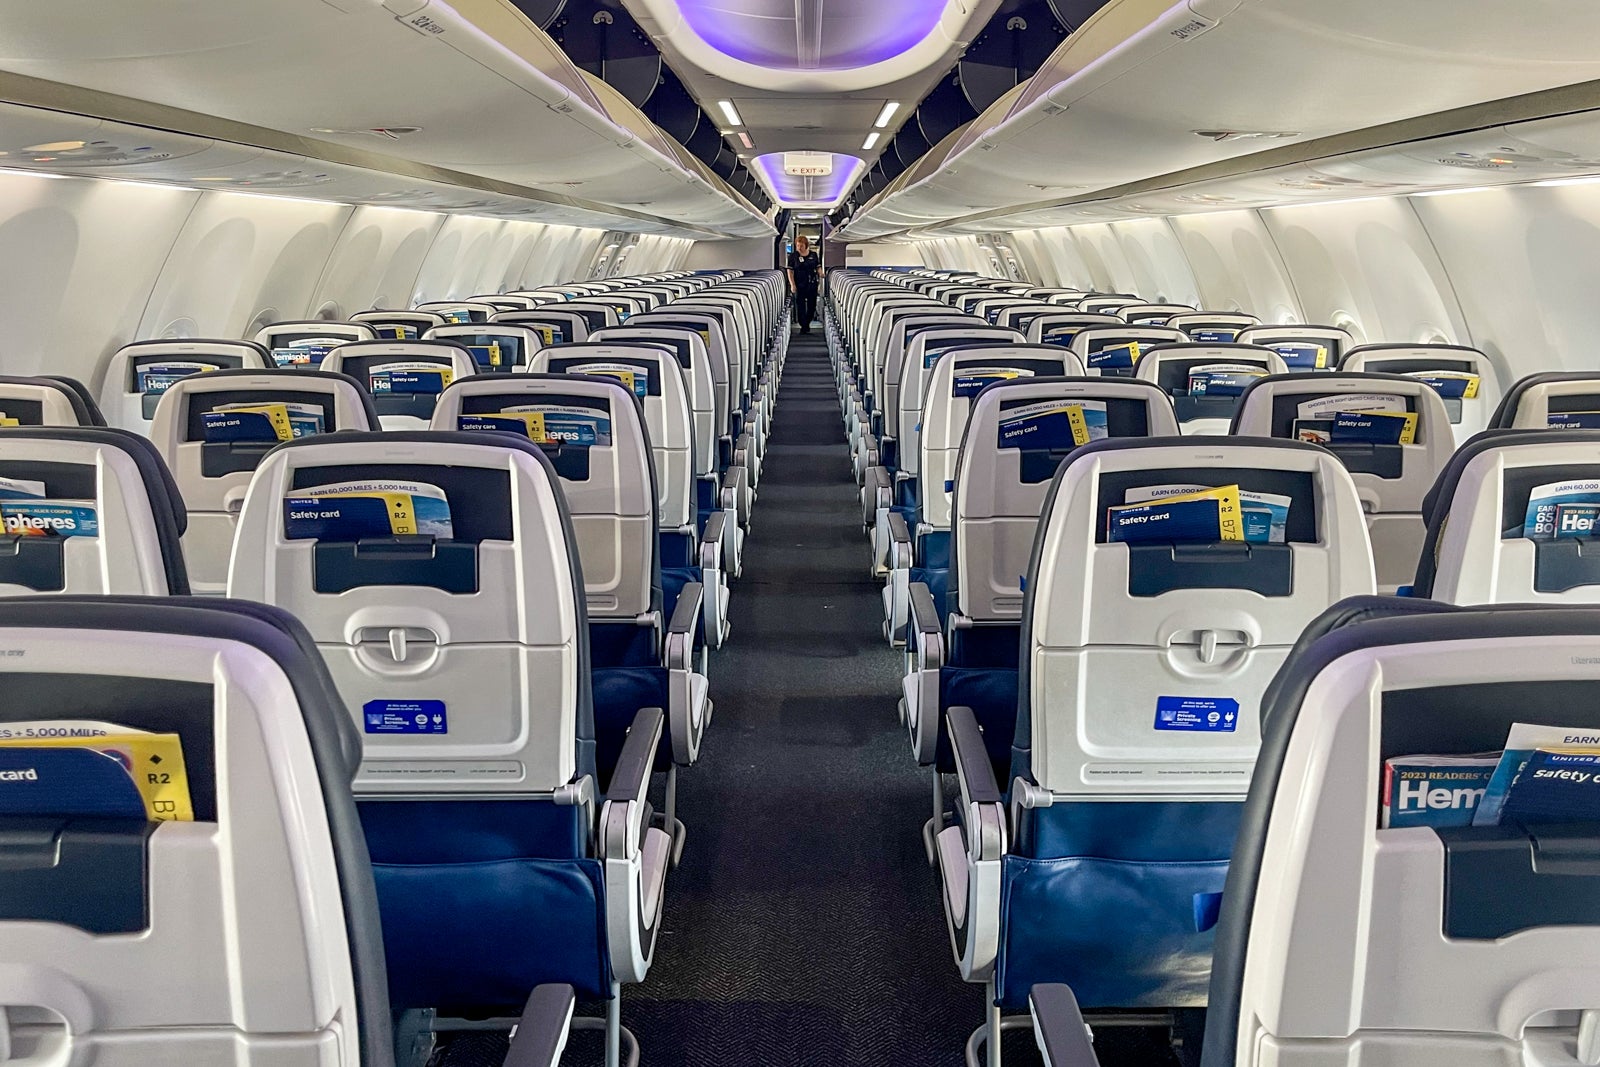 United economy seating on the Boeing 737 MAX 9